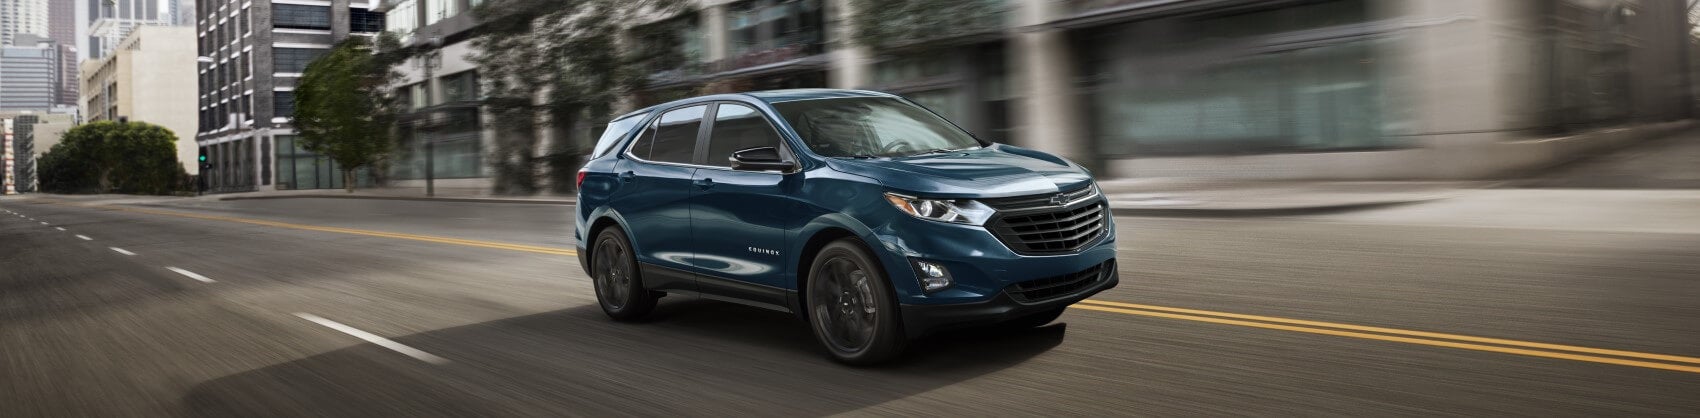 What Does Service Stabilitrak Mean on a Chevy Equinox?